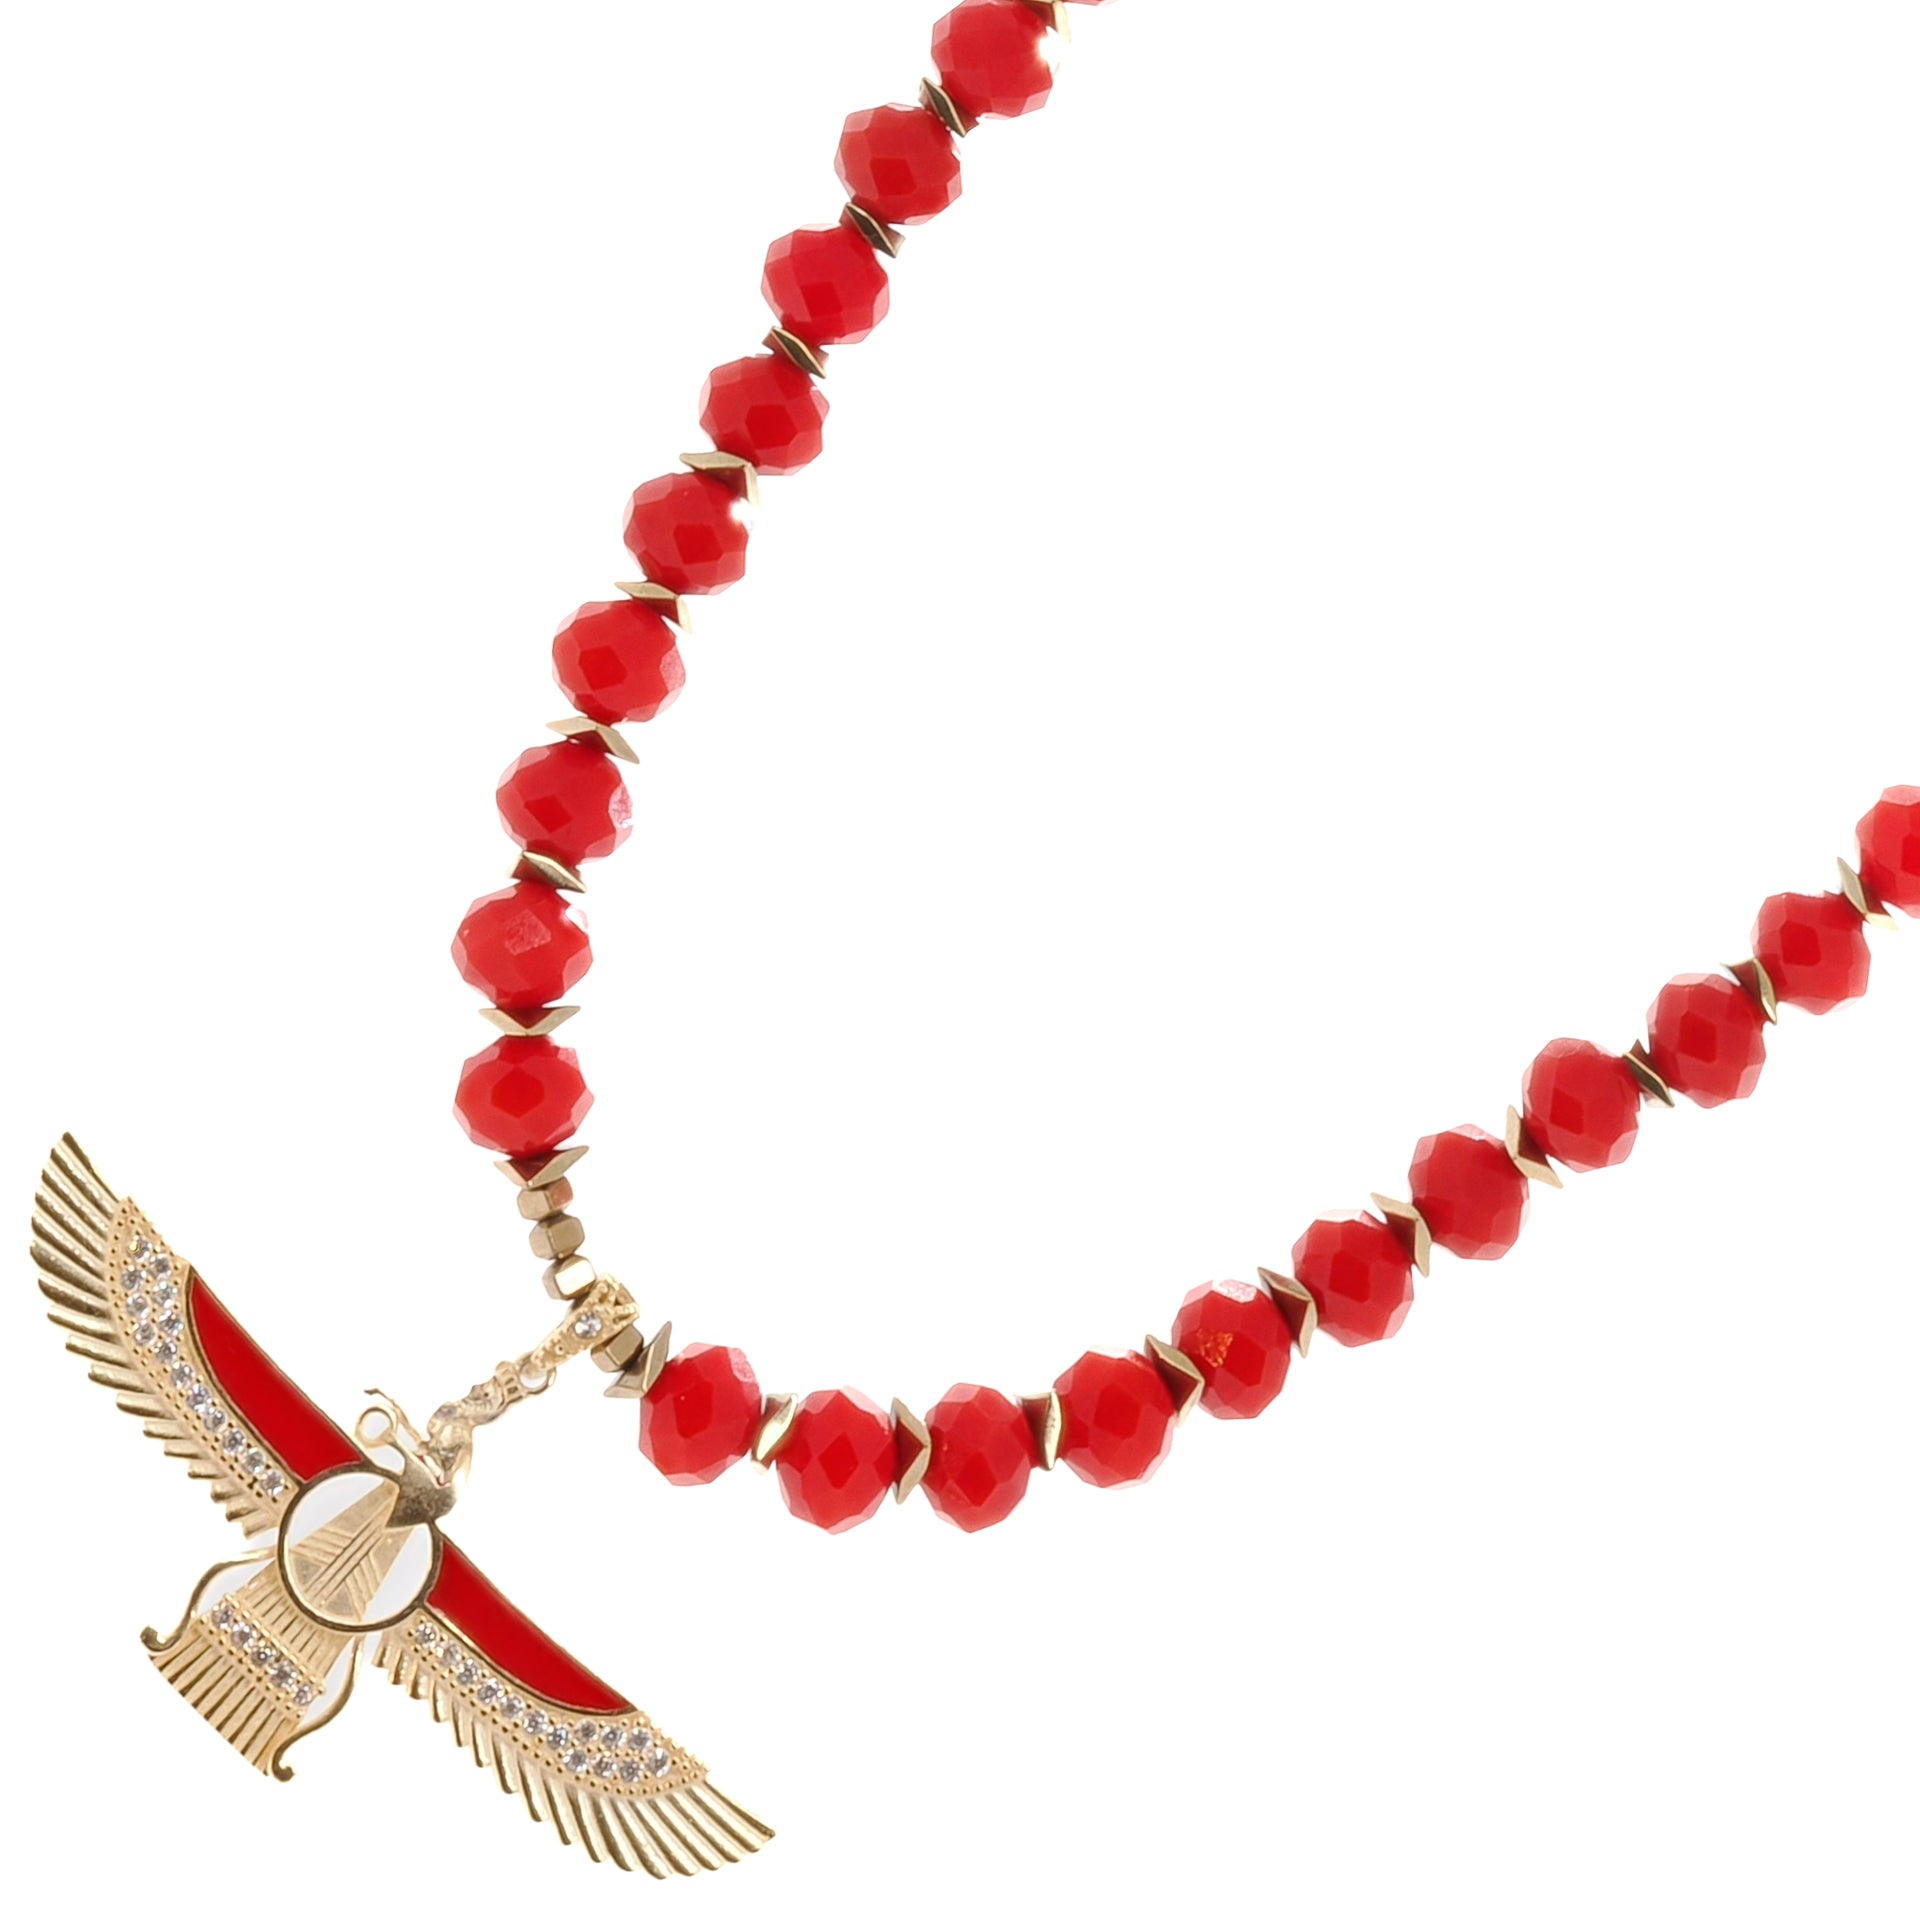 Stylish Protection - The Gold Hematite Beads and Symbolic Pendant on the Red Crystal Necklace.